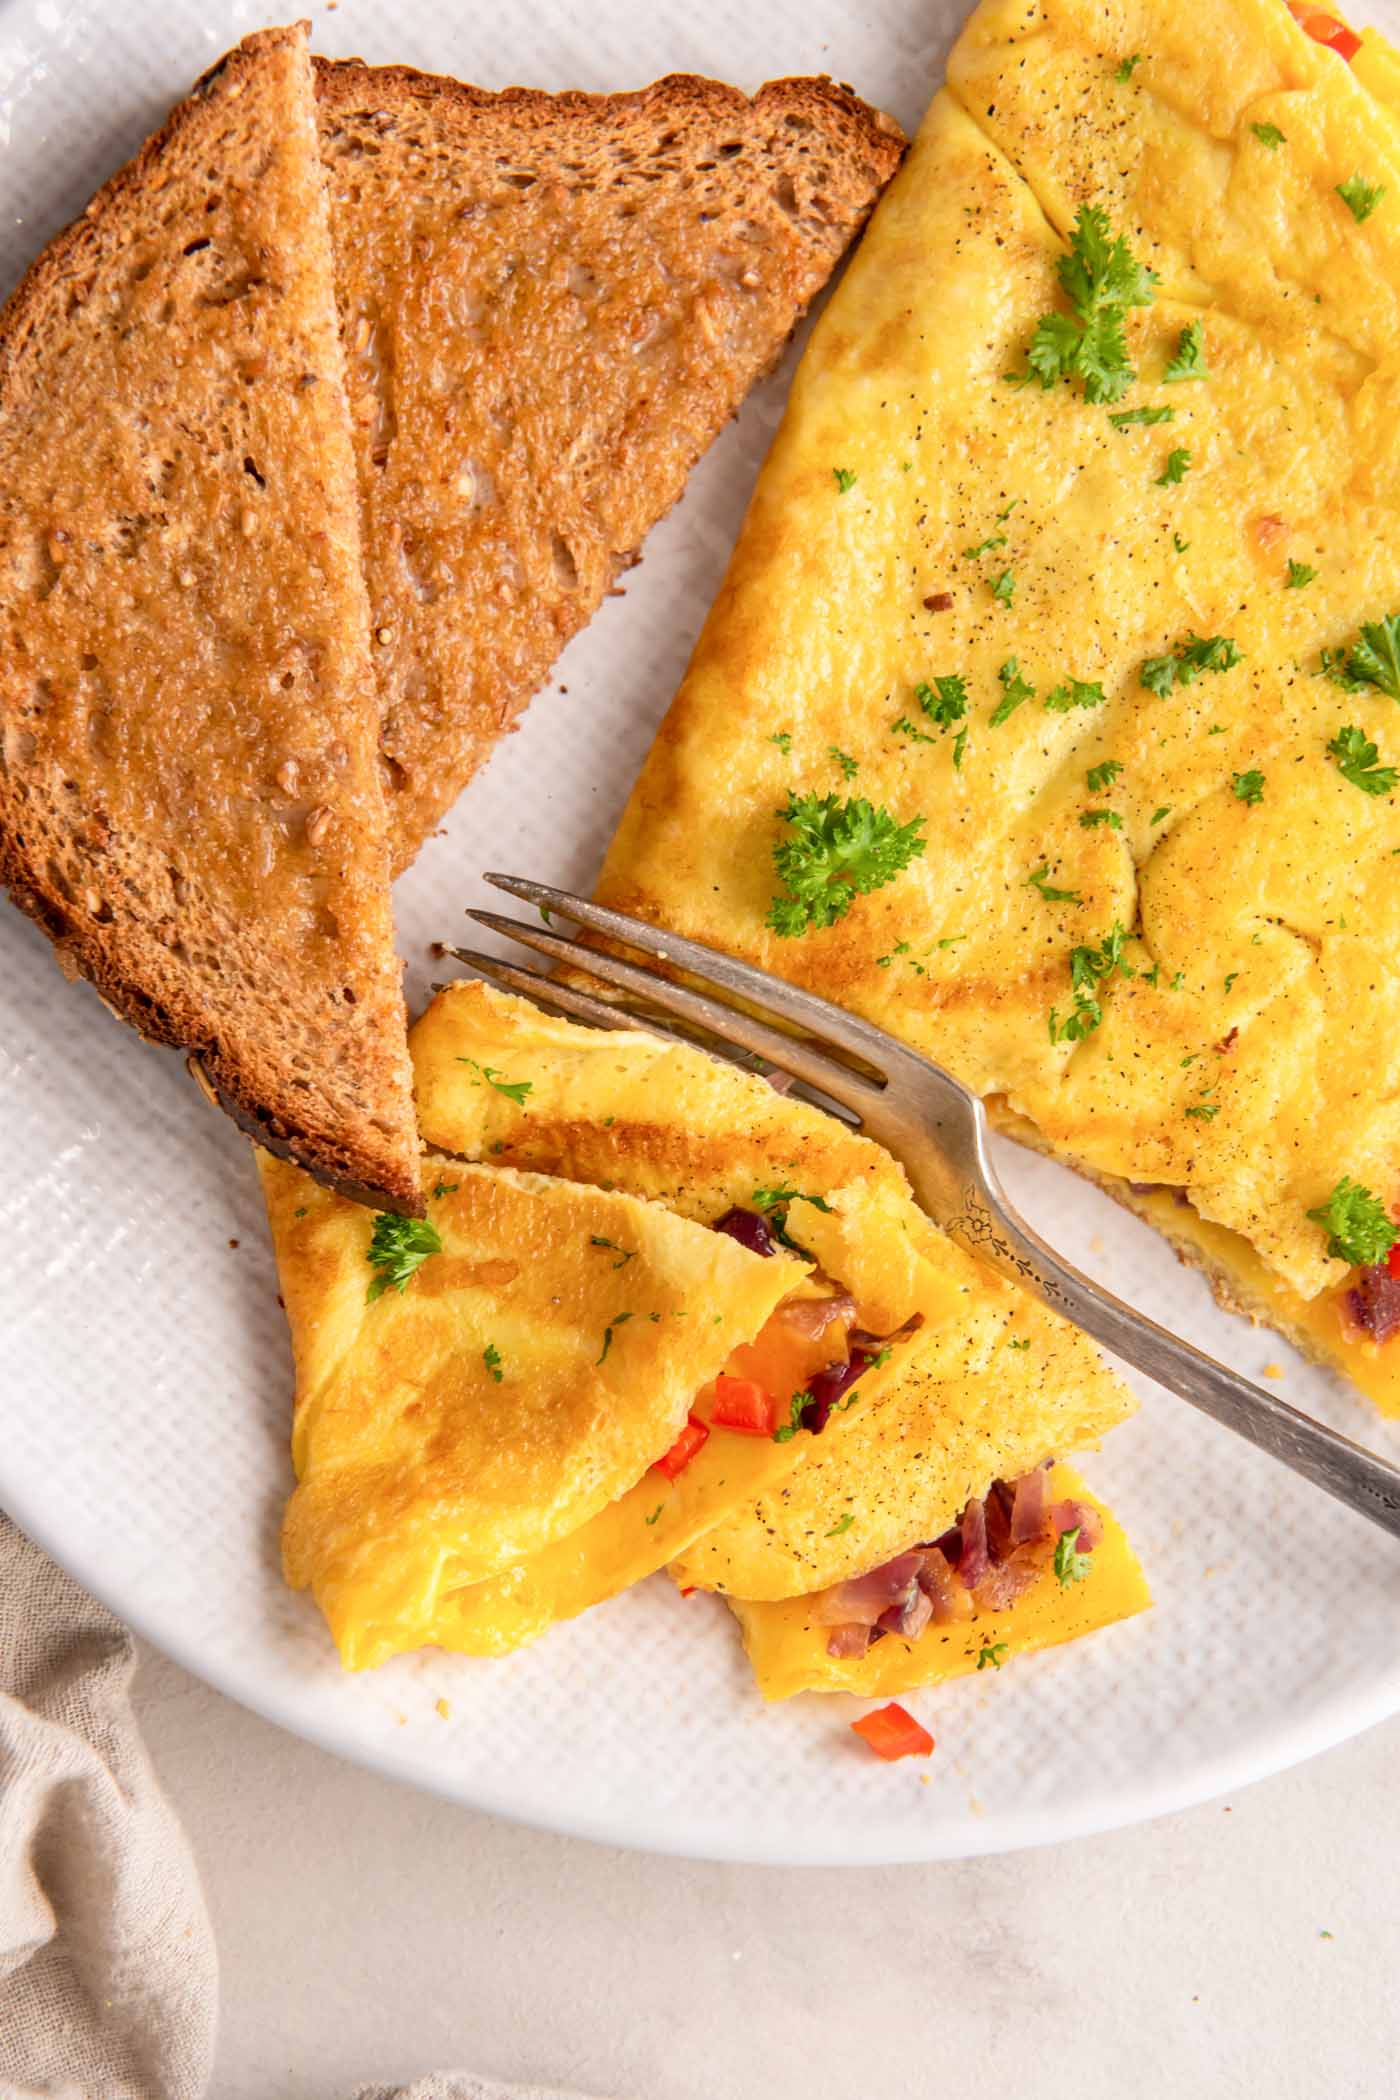 Omelette and buttered toast on a plate with fork and a few bites of omelette cut.